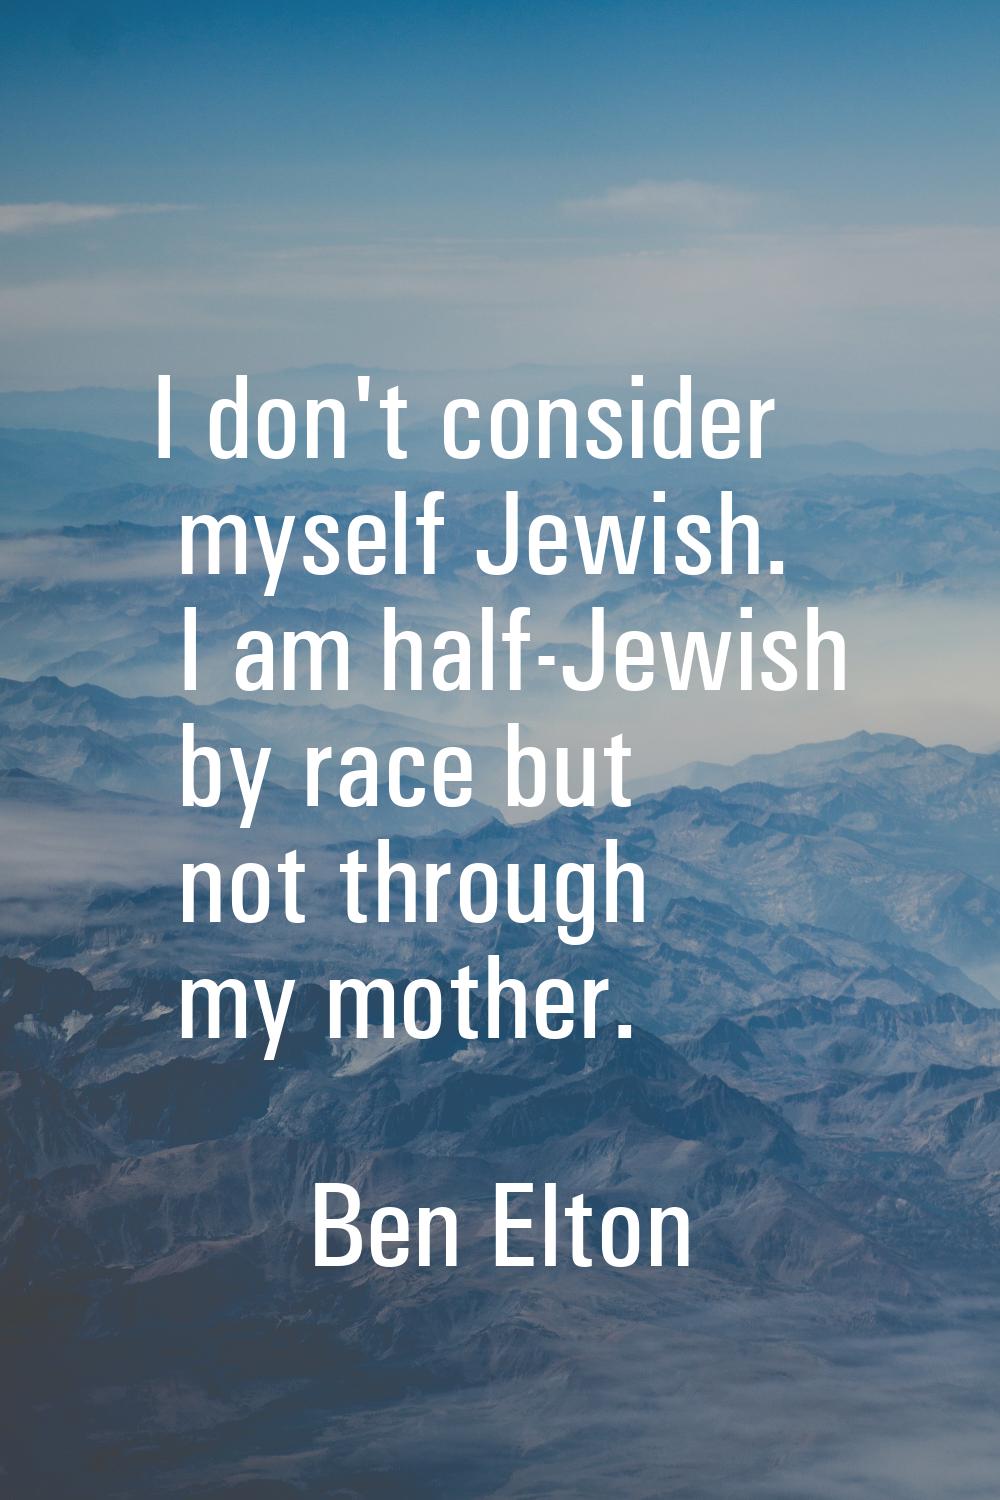 I don't consider myself Jewish. I am half-Jewish by race but not through my mother.